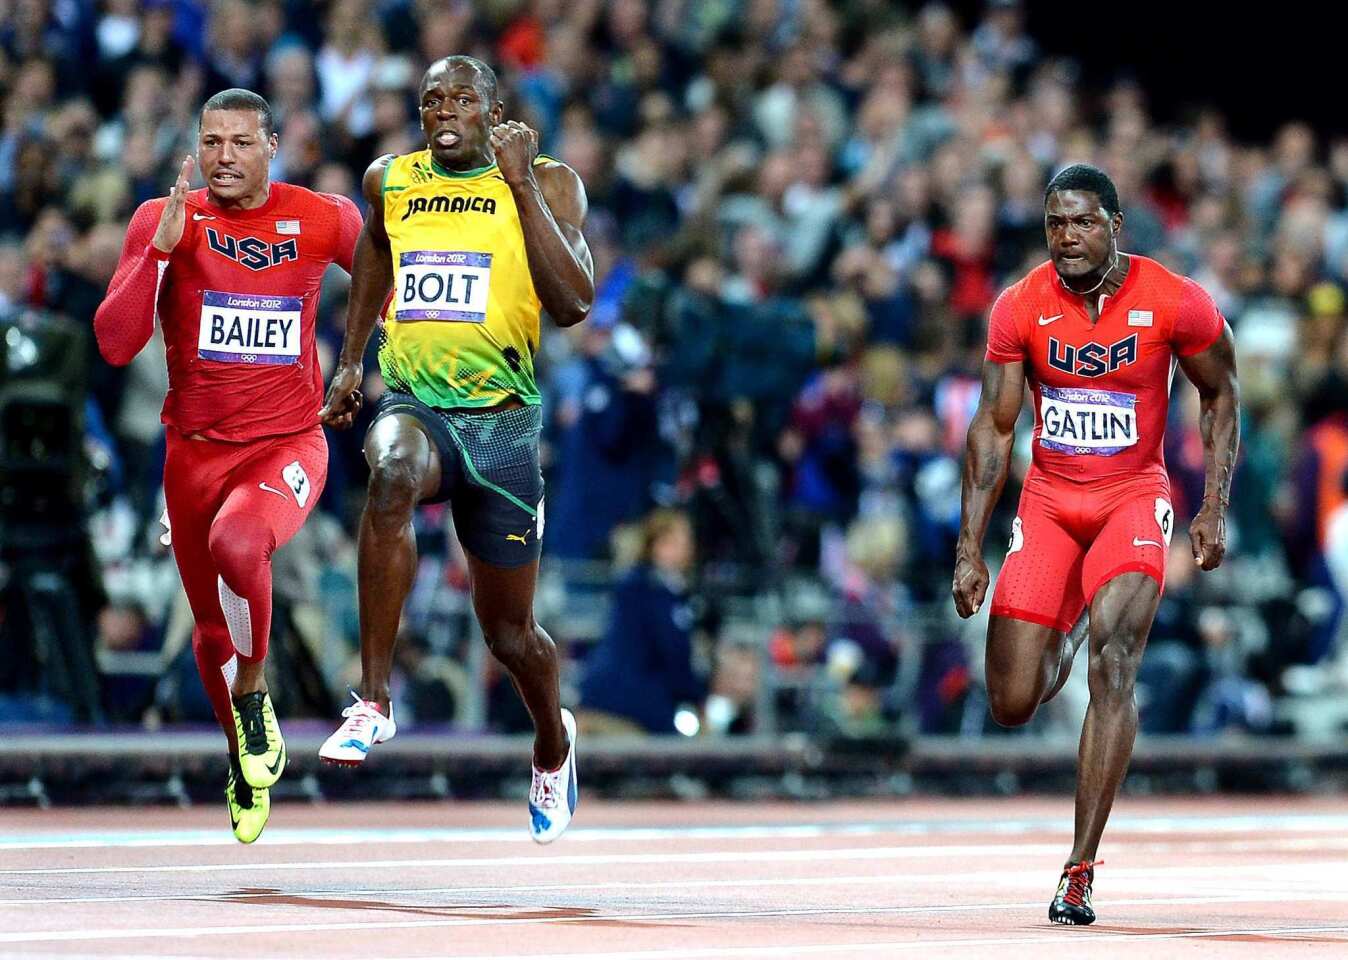 Jamaica's Usain Bolt pulls ahead of Team USA's Ryan Bailey, left, and Justin Gatlin to win gold in the 100 meters.